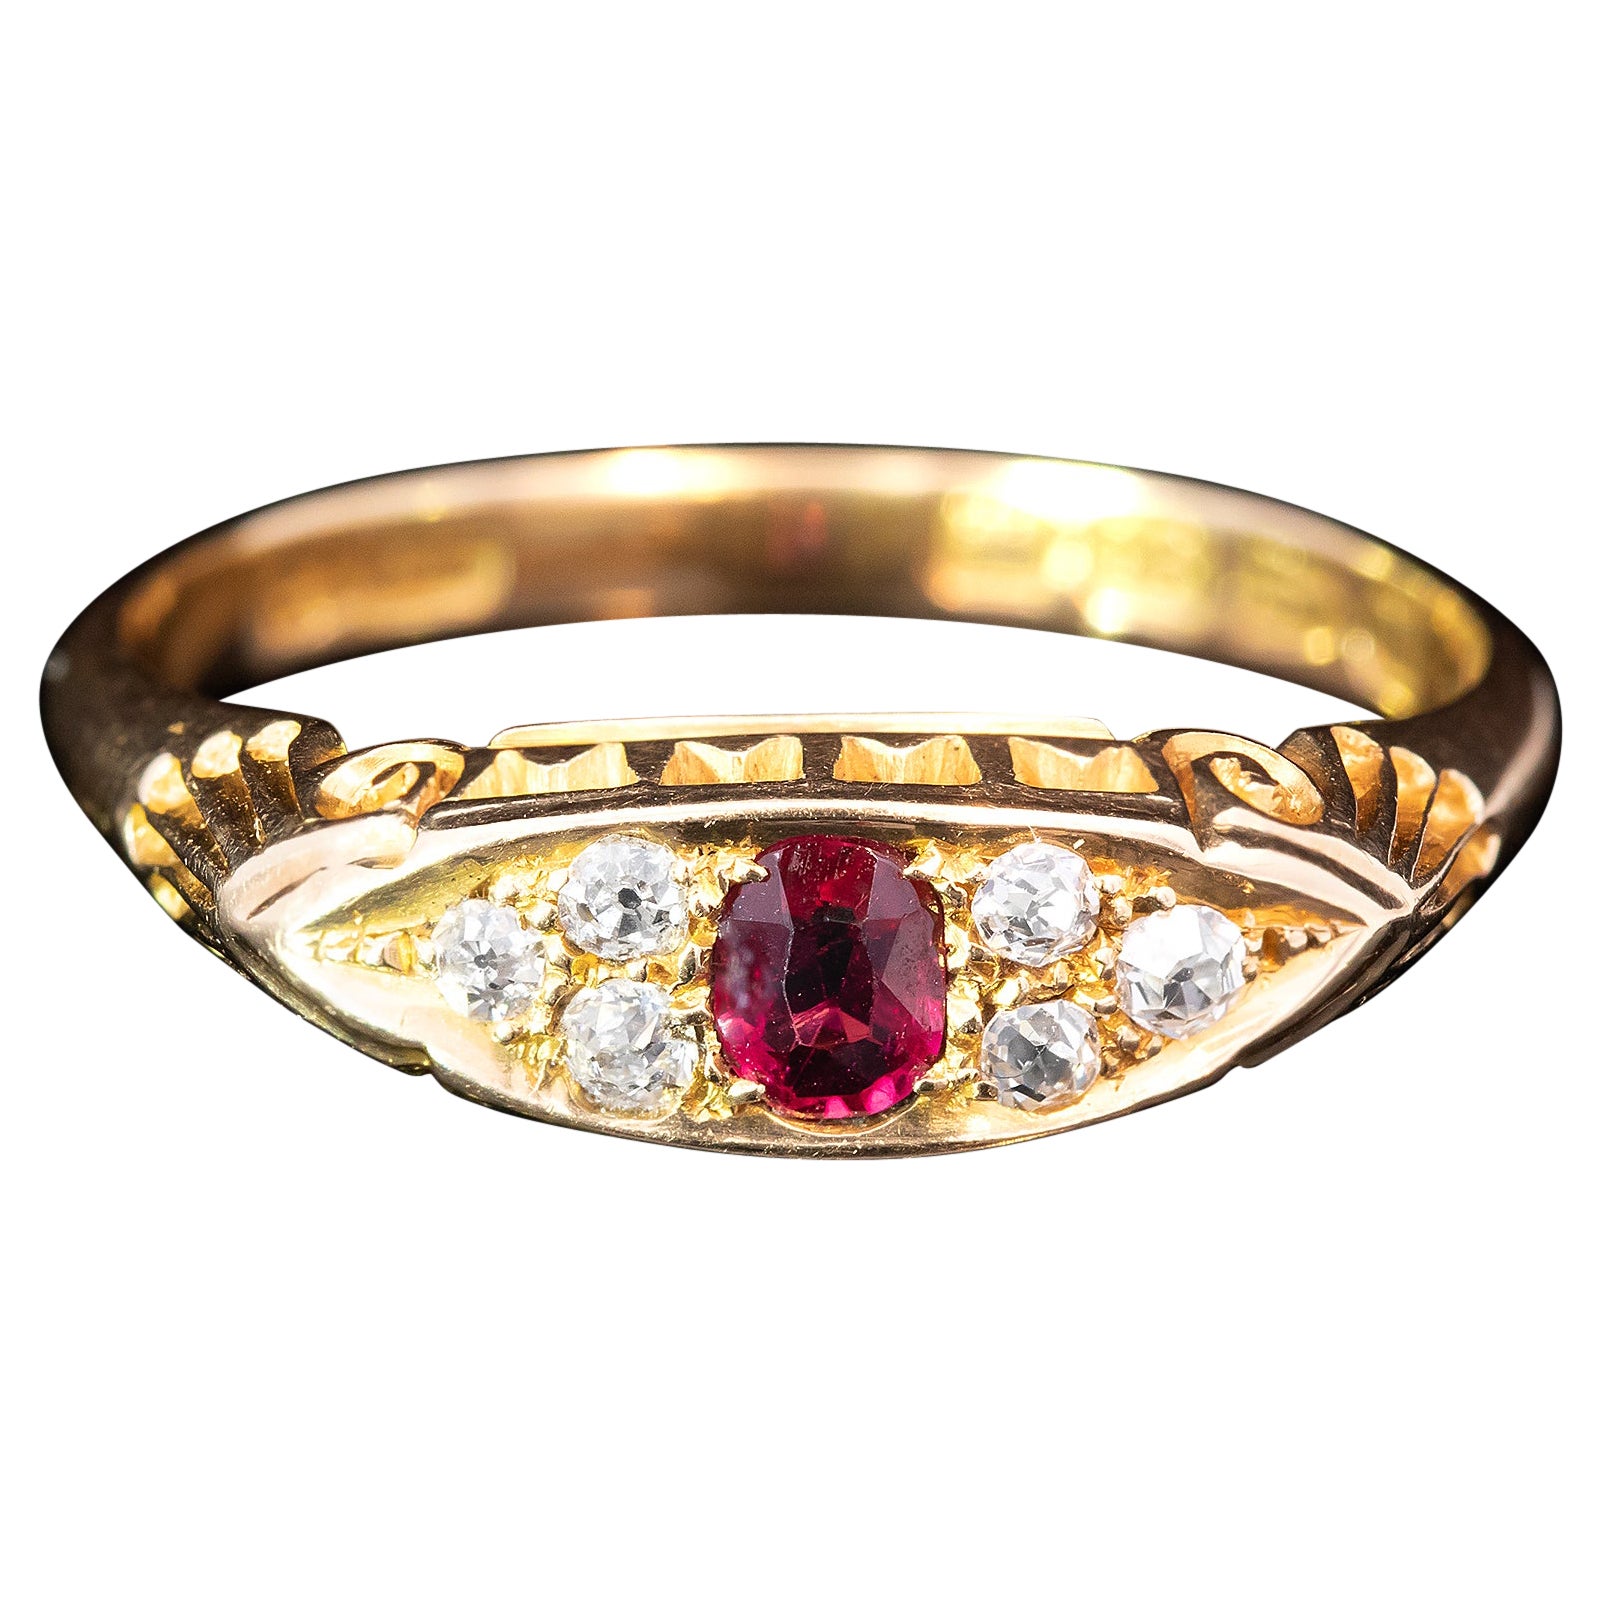 Victorian Ruby and Diamond Ring  - Hallmarked Chester 1895